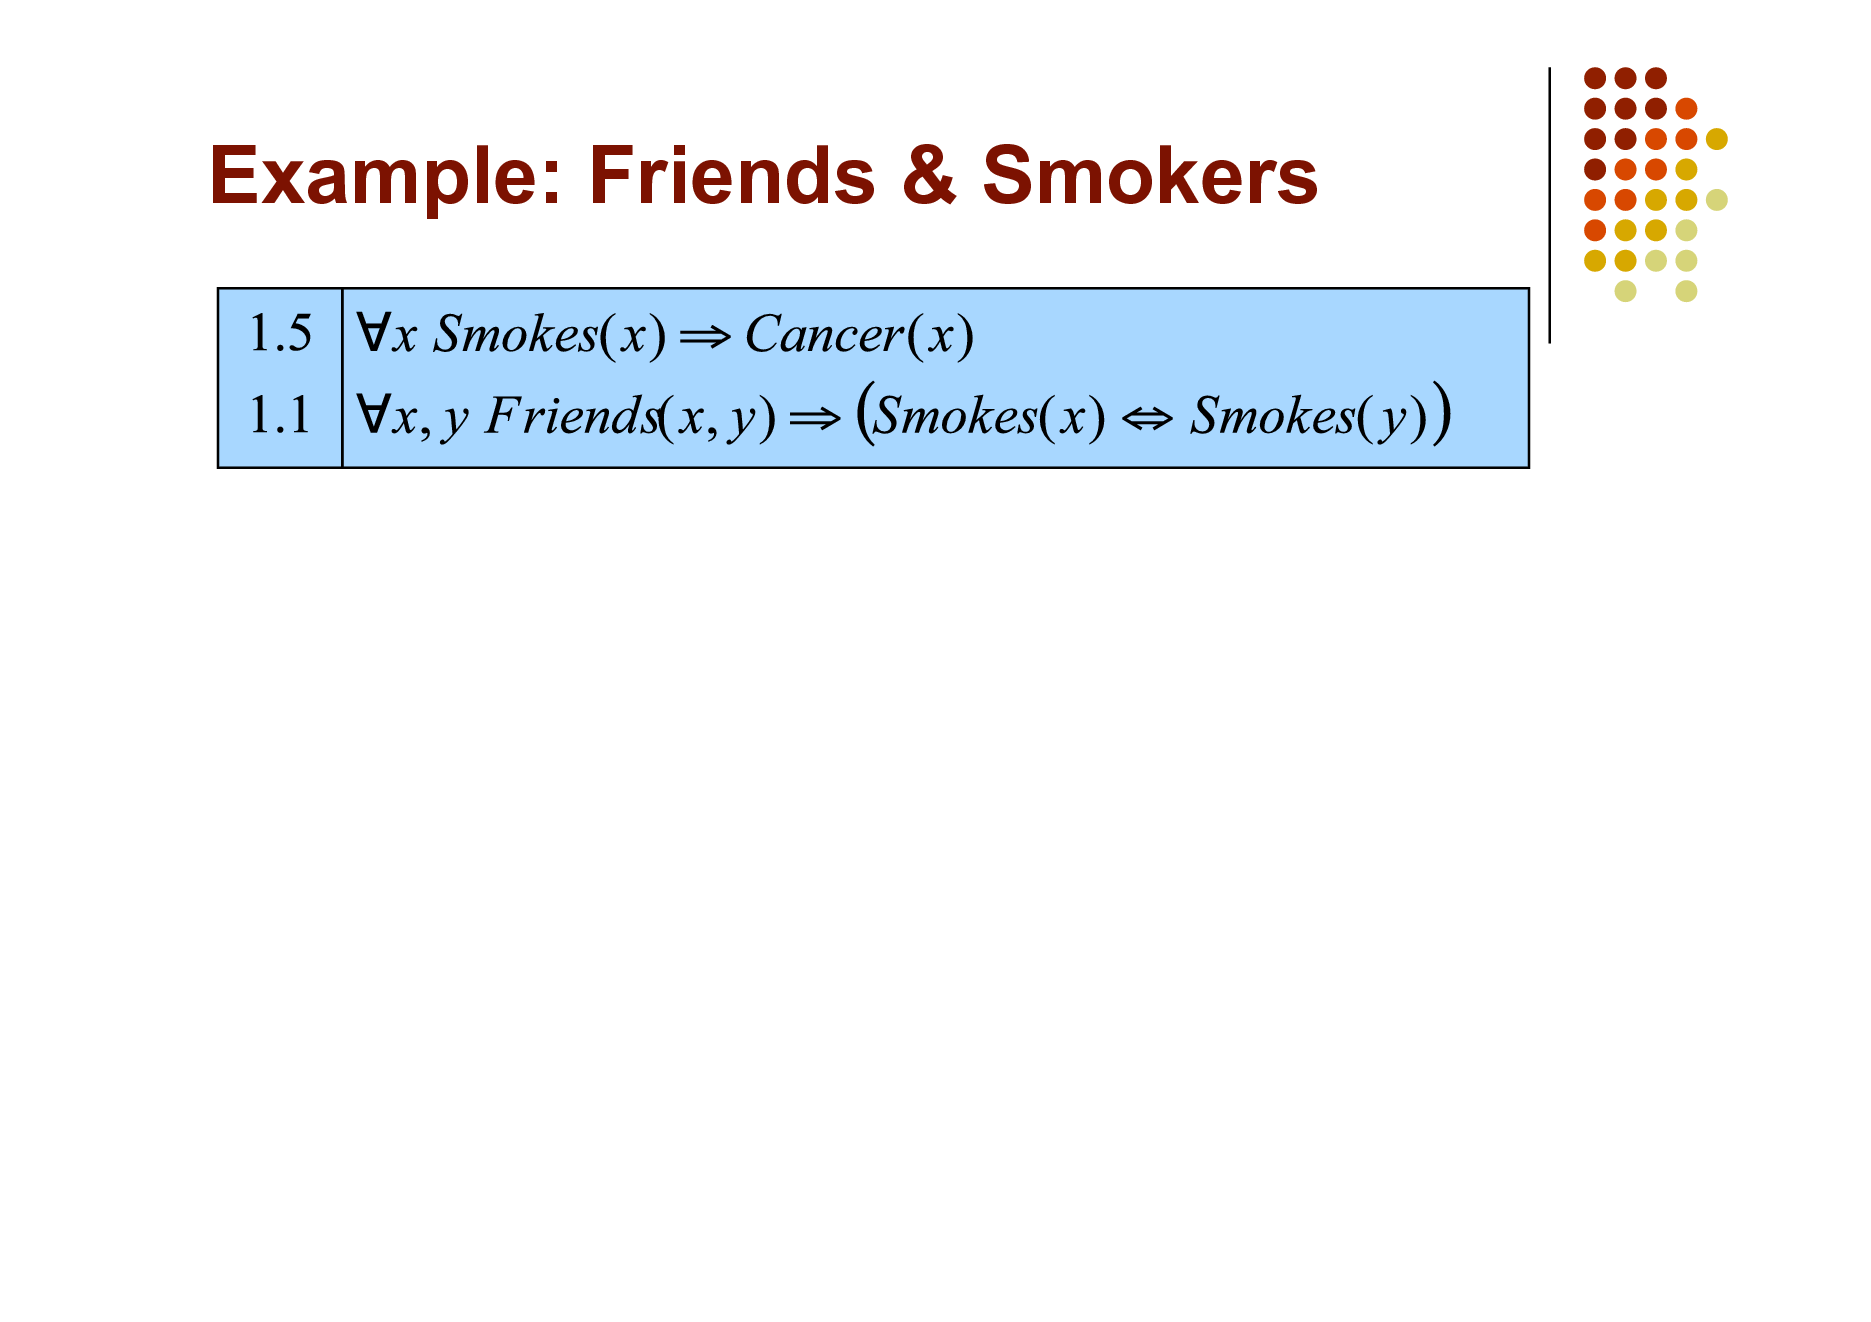 Slide: Example: Friends & Smokers

